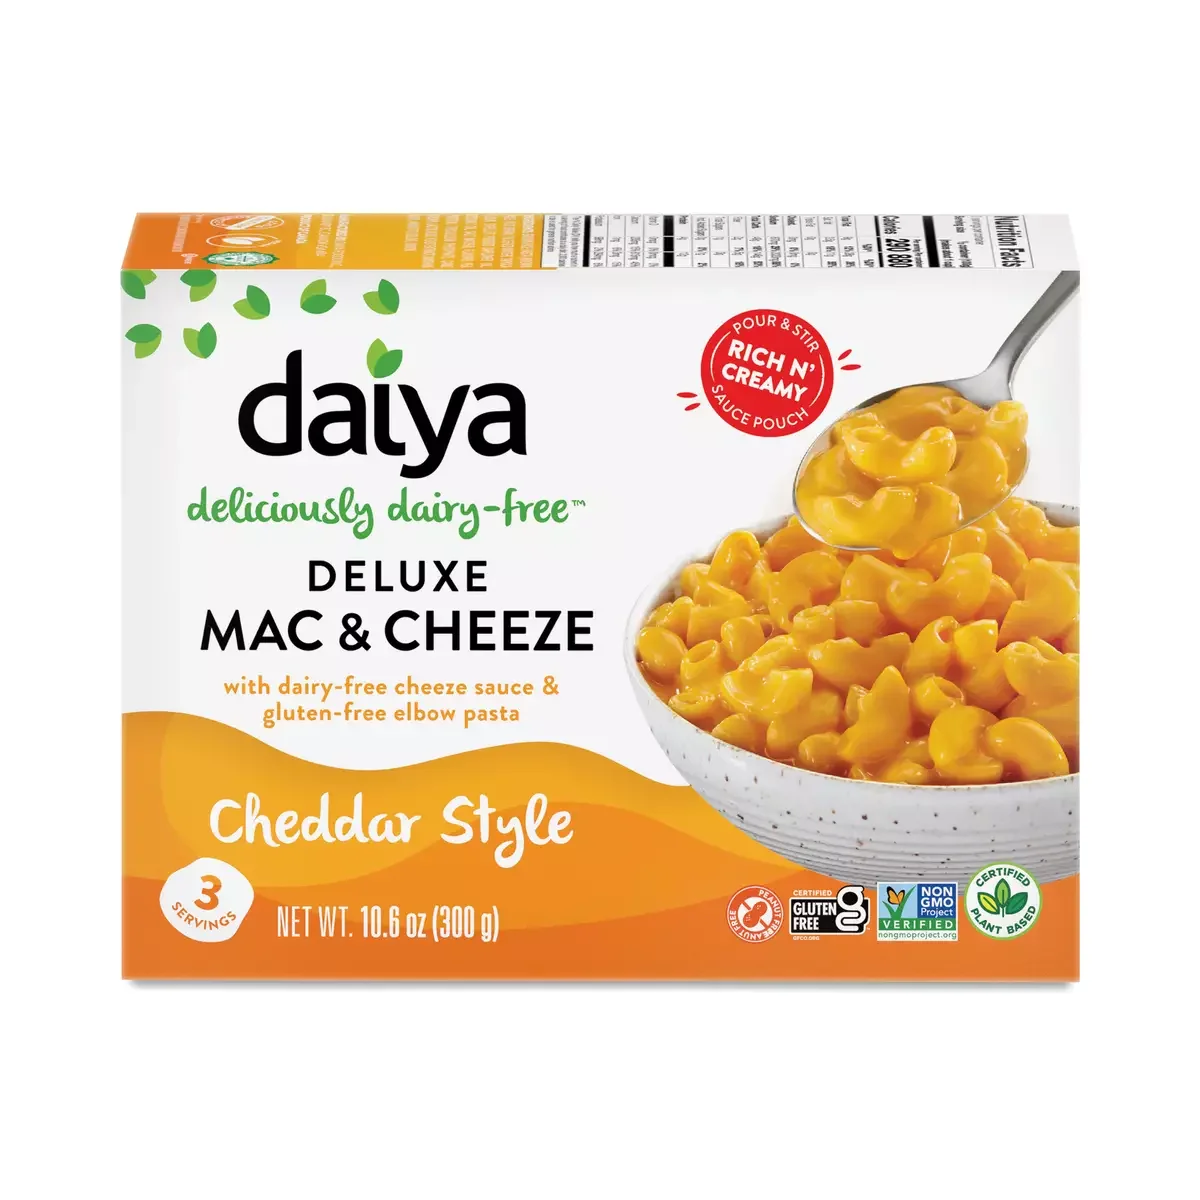 Cheddar Style Deluxe Mac & Cheeze